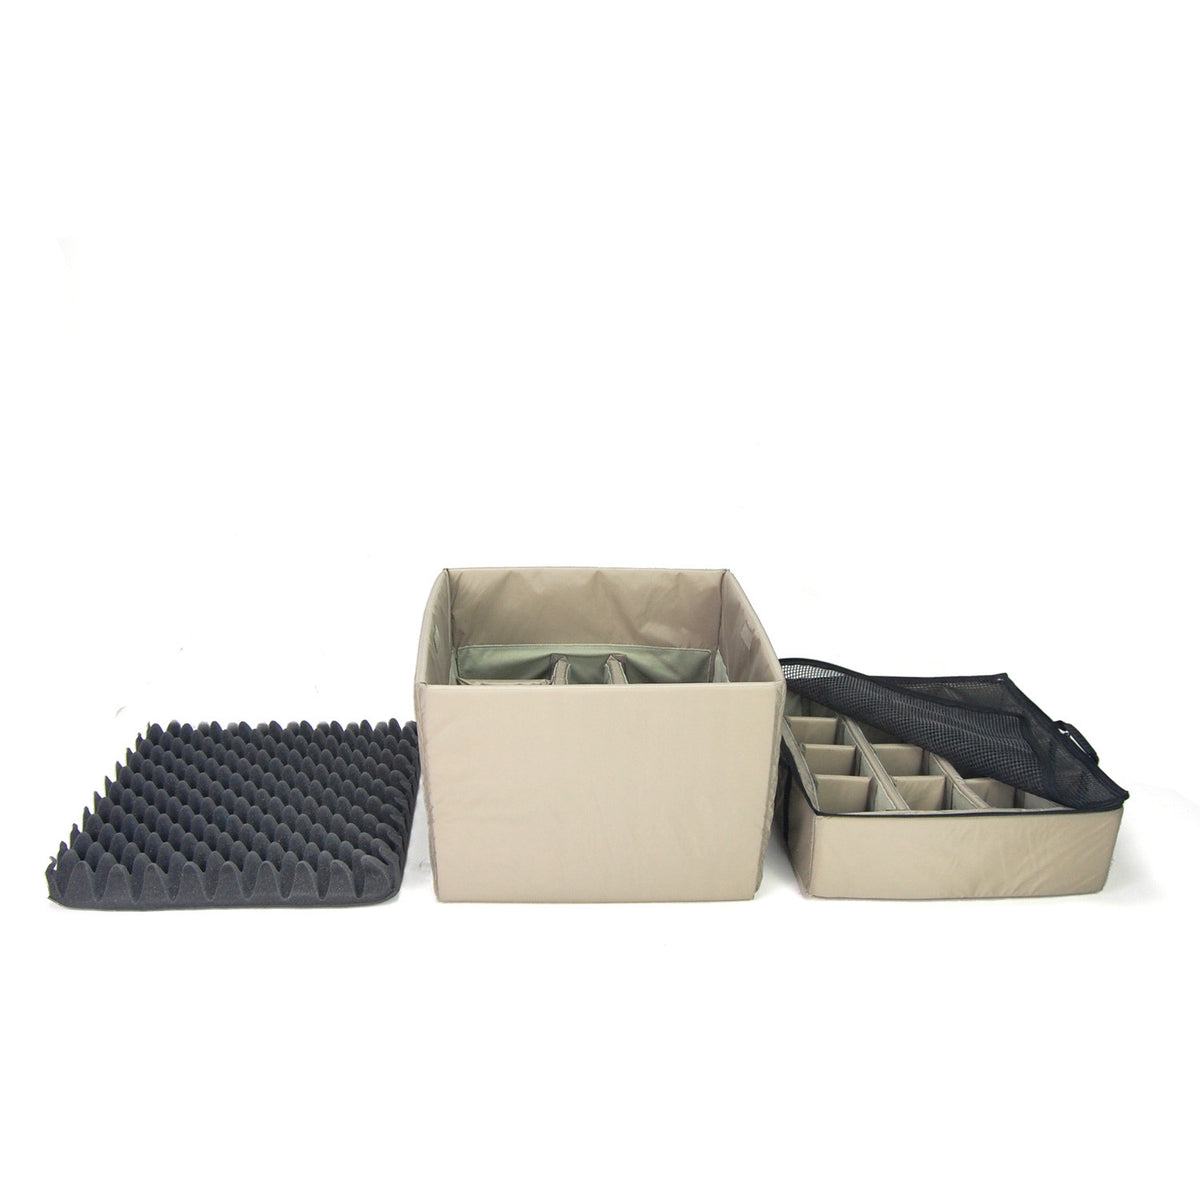 Pelican™ Replacement Padded Dividers